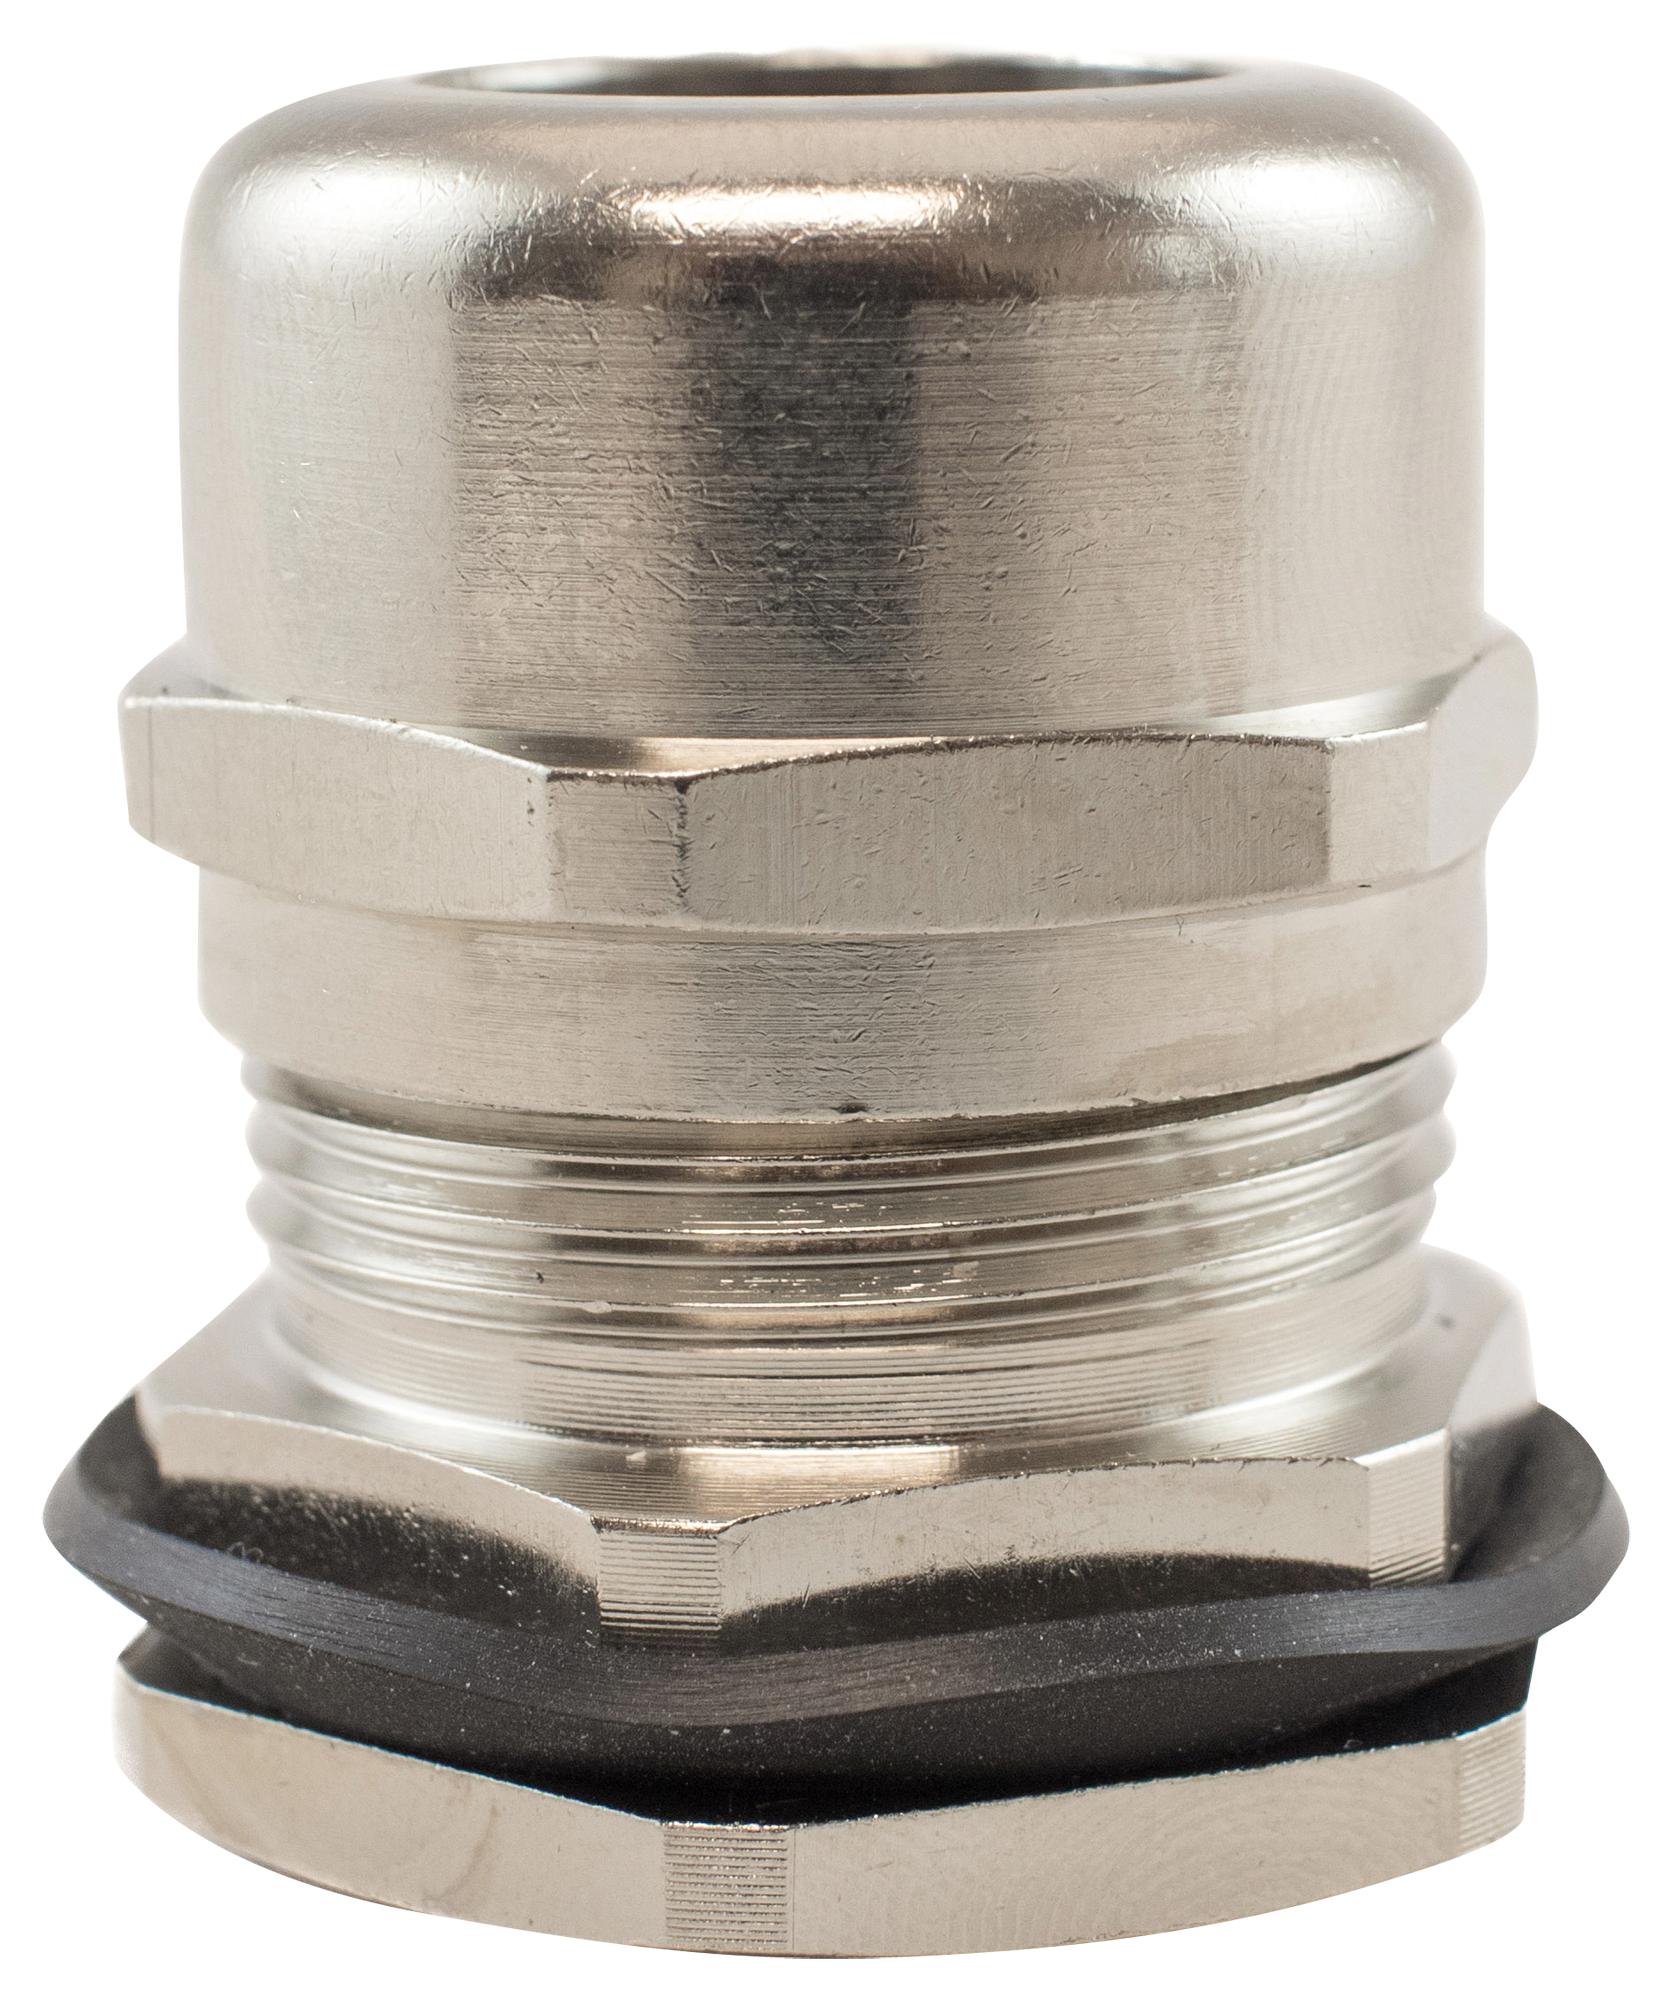 MES25 NC080 CABLE GLAND, M25X1.5, BRASS, 11-17MM ALPHA WIRE